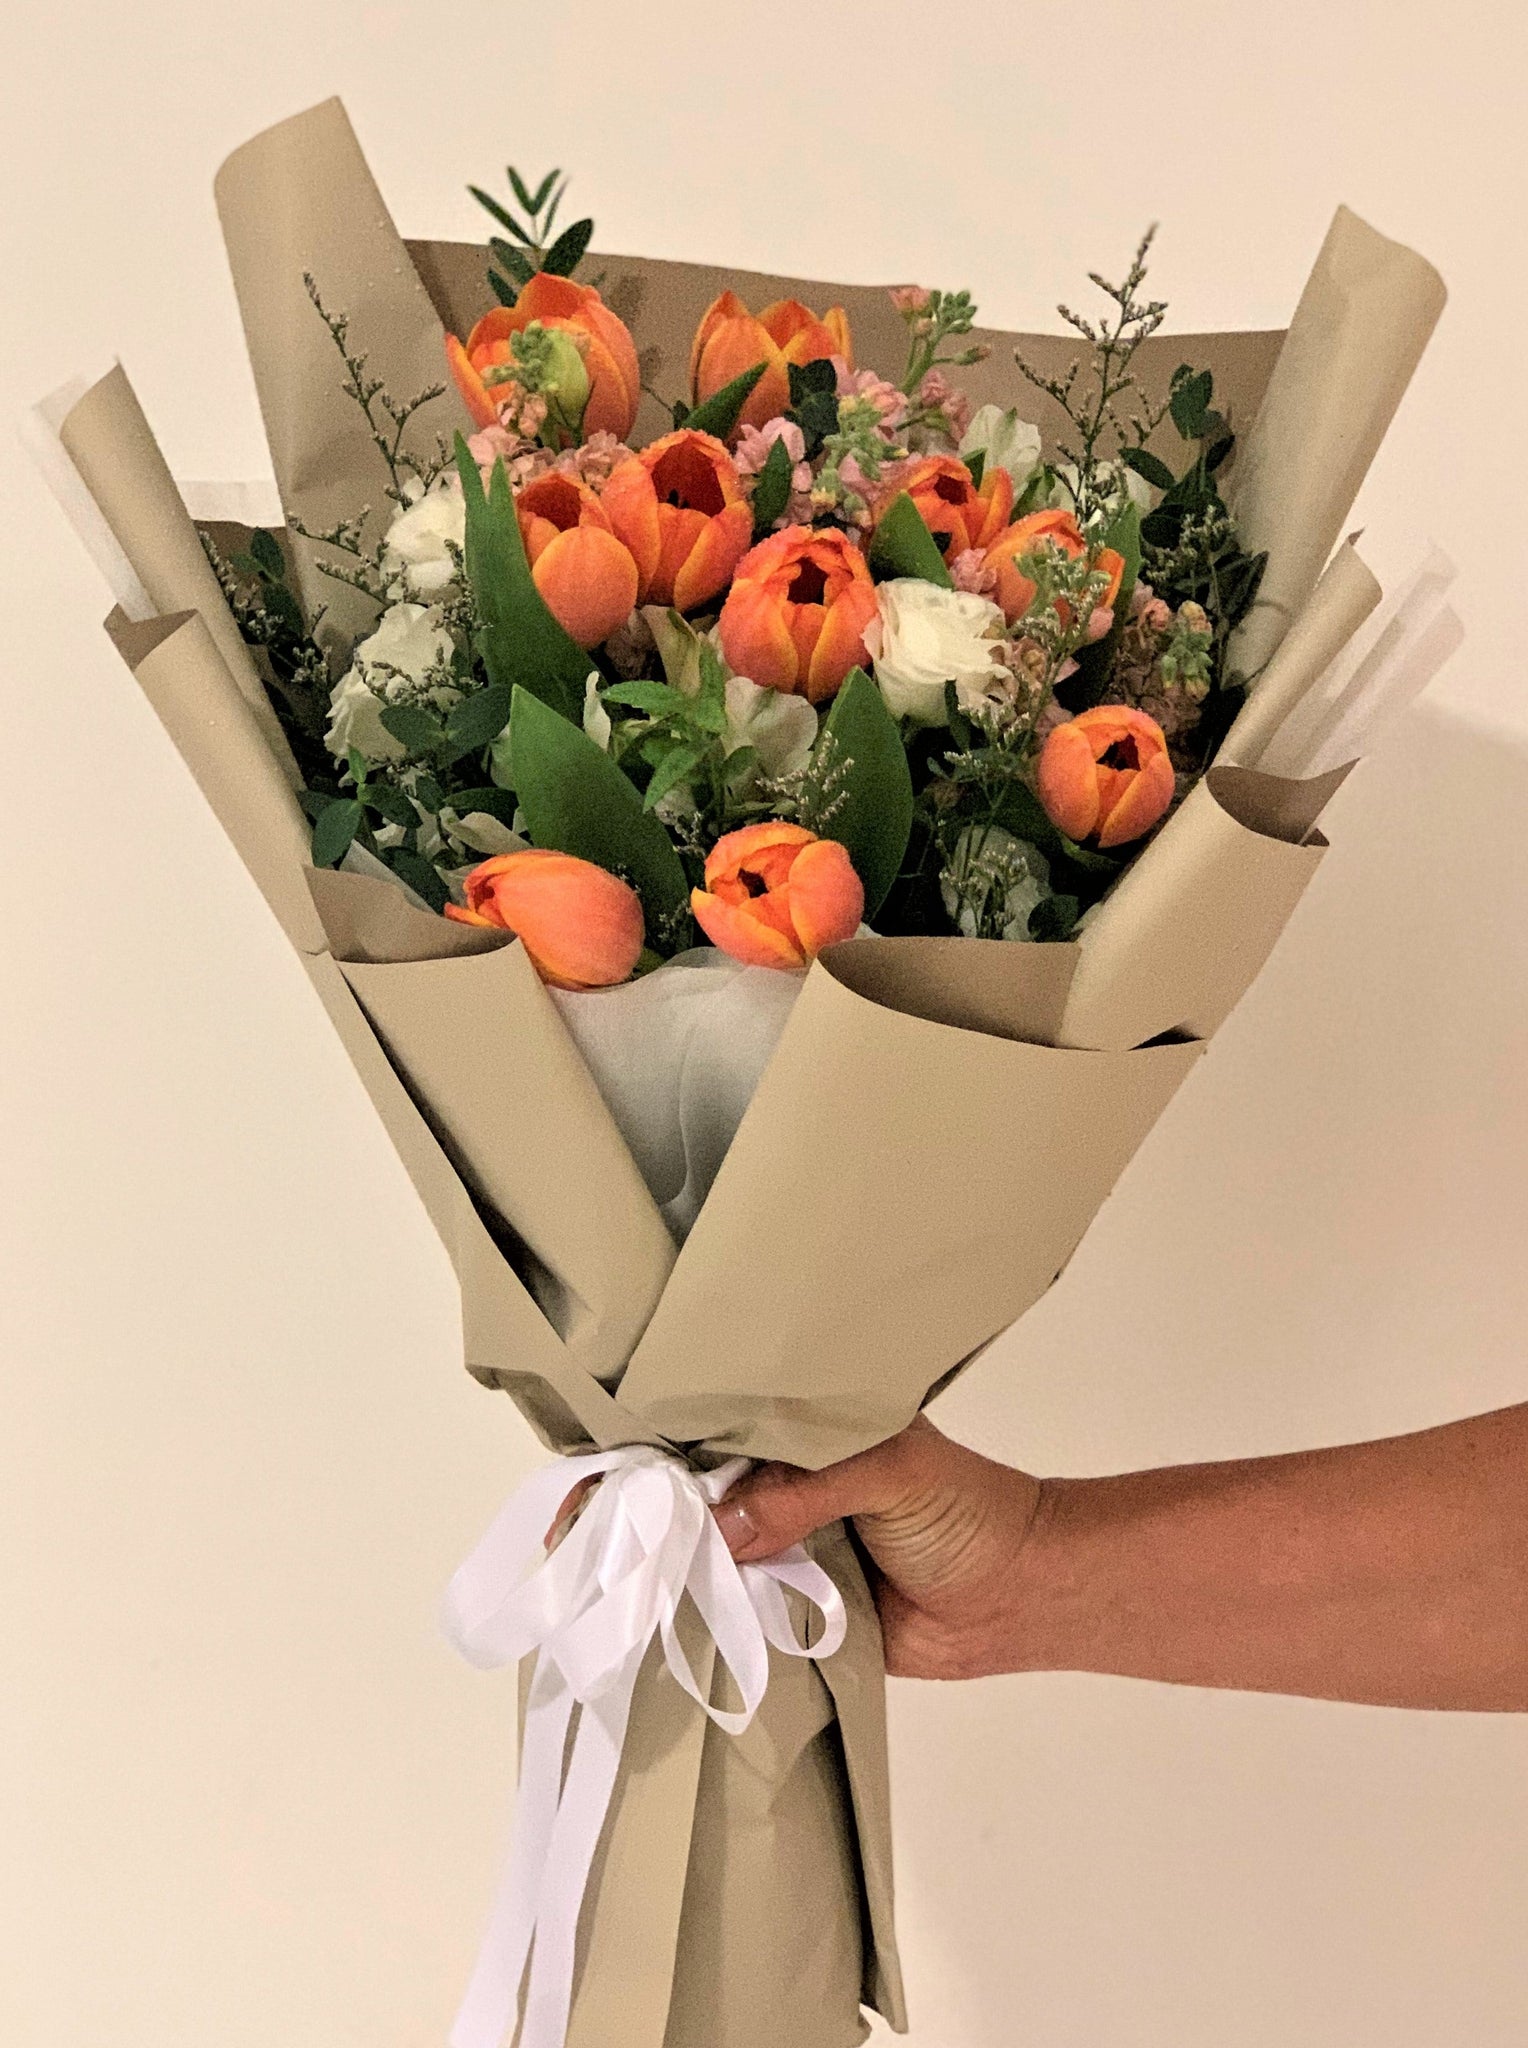 tulip bouquet Cheap Flower Delivery Same day flower delivery available for orders placed before 2pm. Free delivery above $60